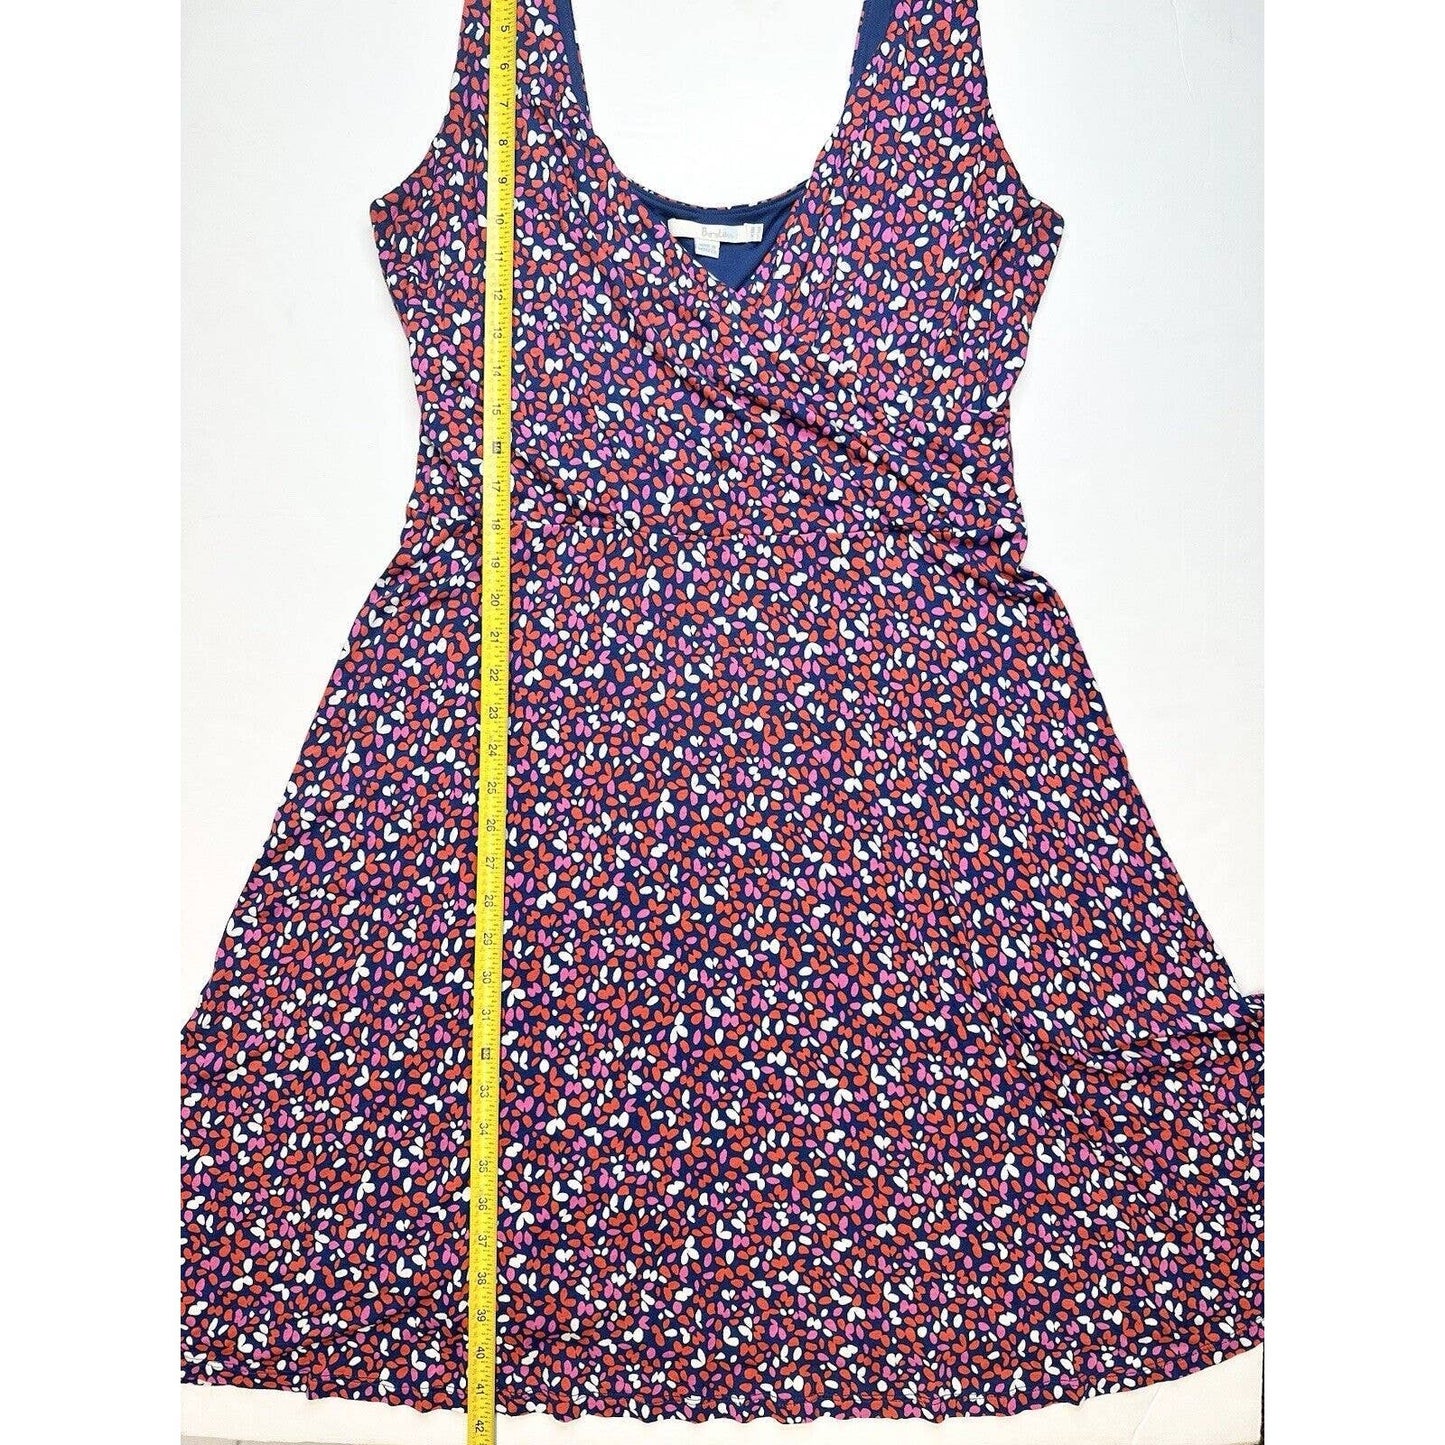 Boden Fit & Flare Sleeveless Dress (US 14/UK 18) Red/Pink/Blue Pattern Stretchy